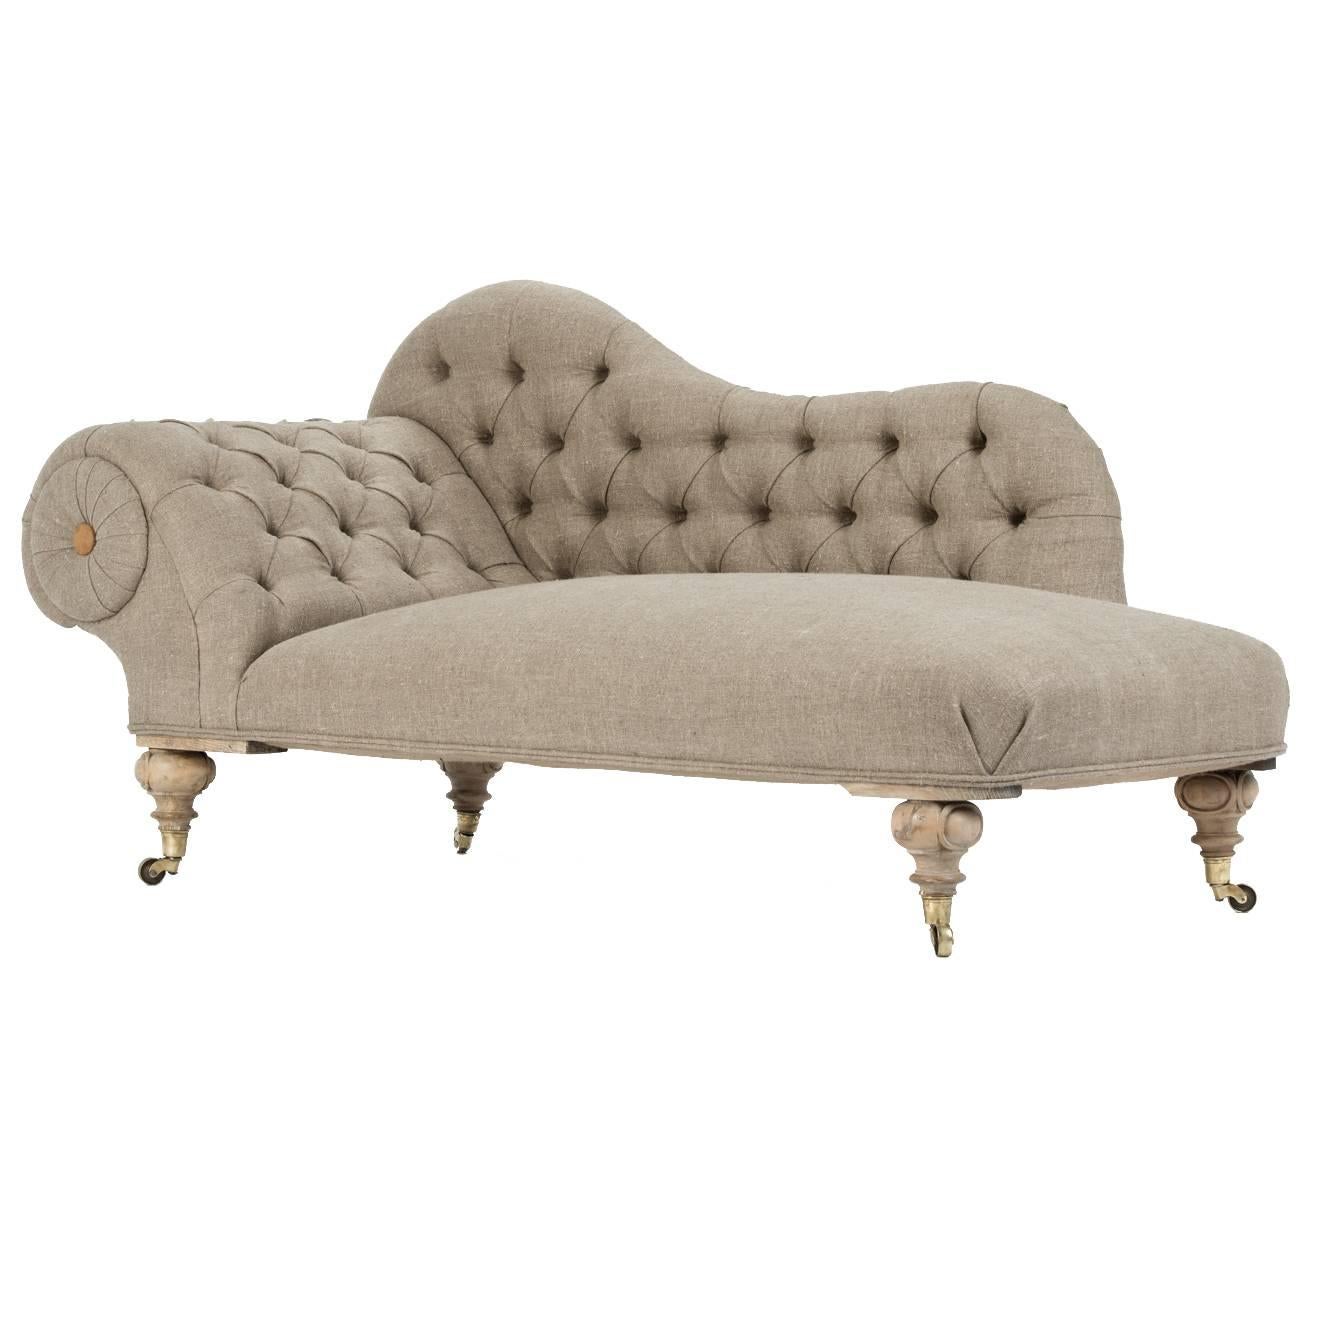 Eclectic Late Victorian Scroll Arm Tufted Chaise Longue in Organic Flax Linen. For Sale